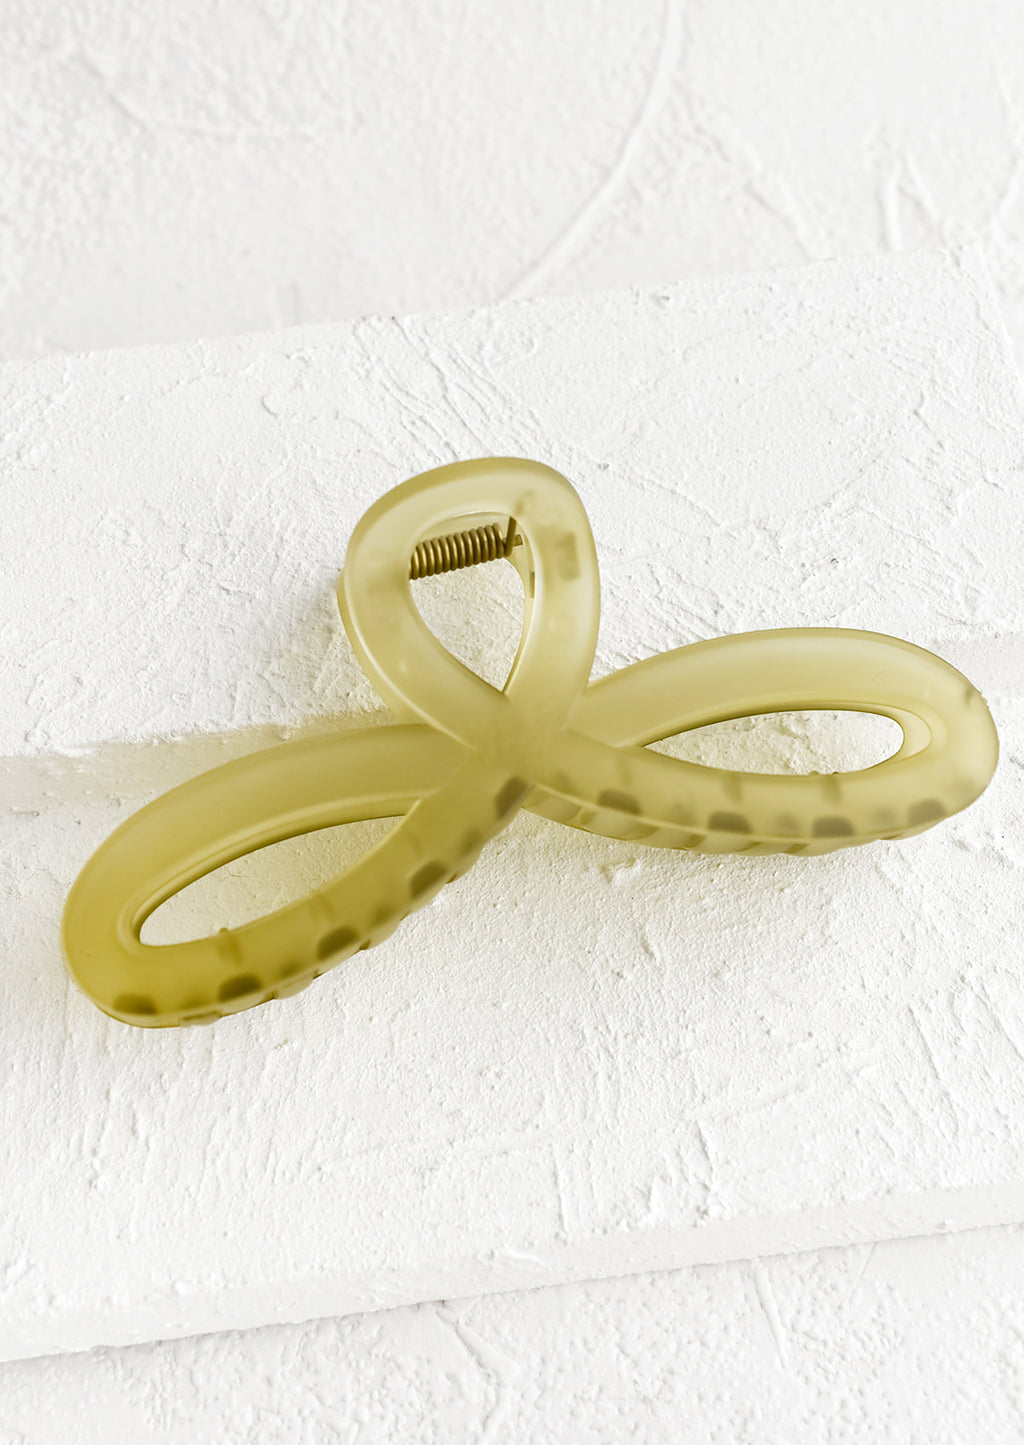 Matte Olive: A curvy hair clip with knotted loop design in frosted olive.